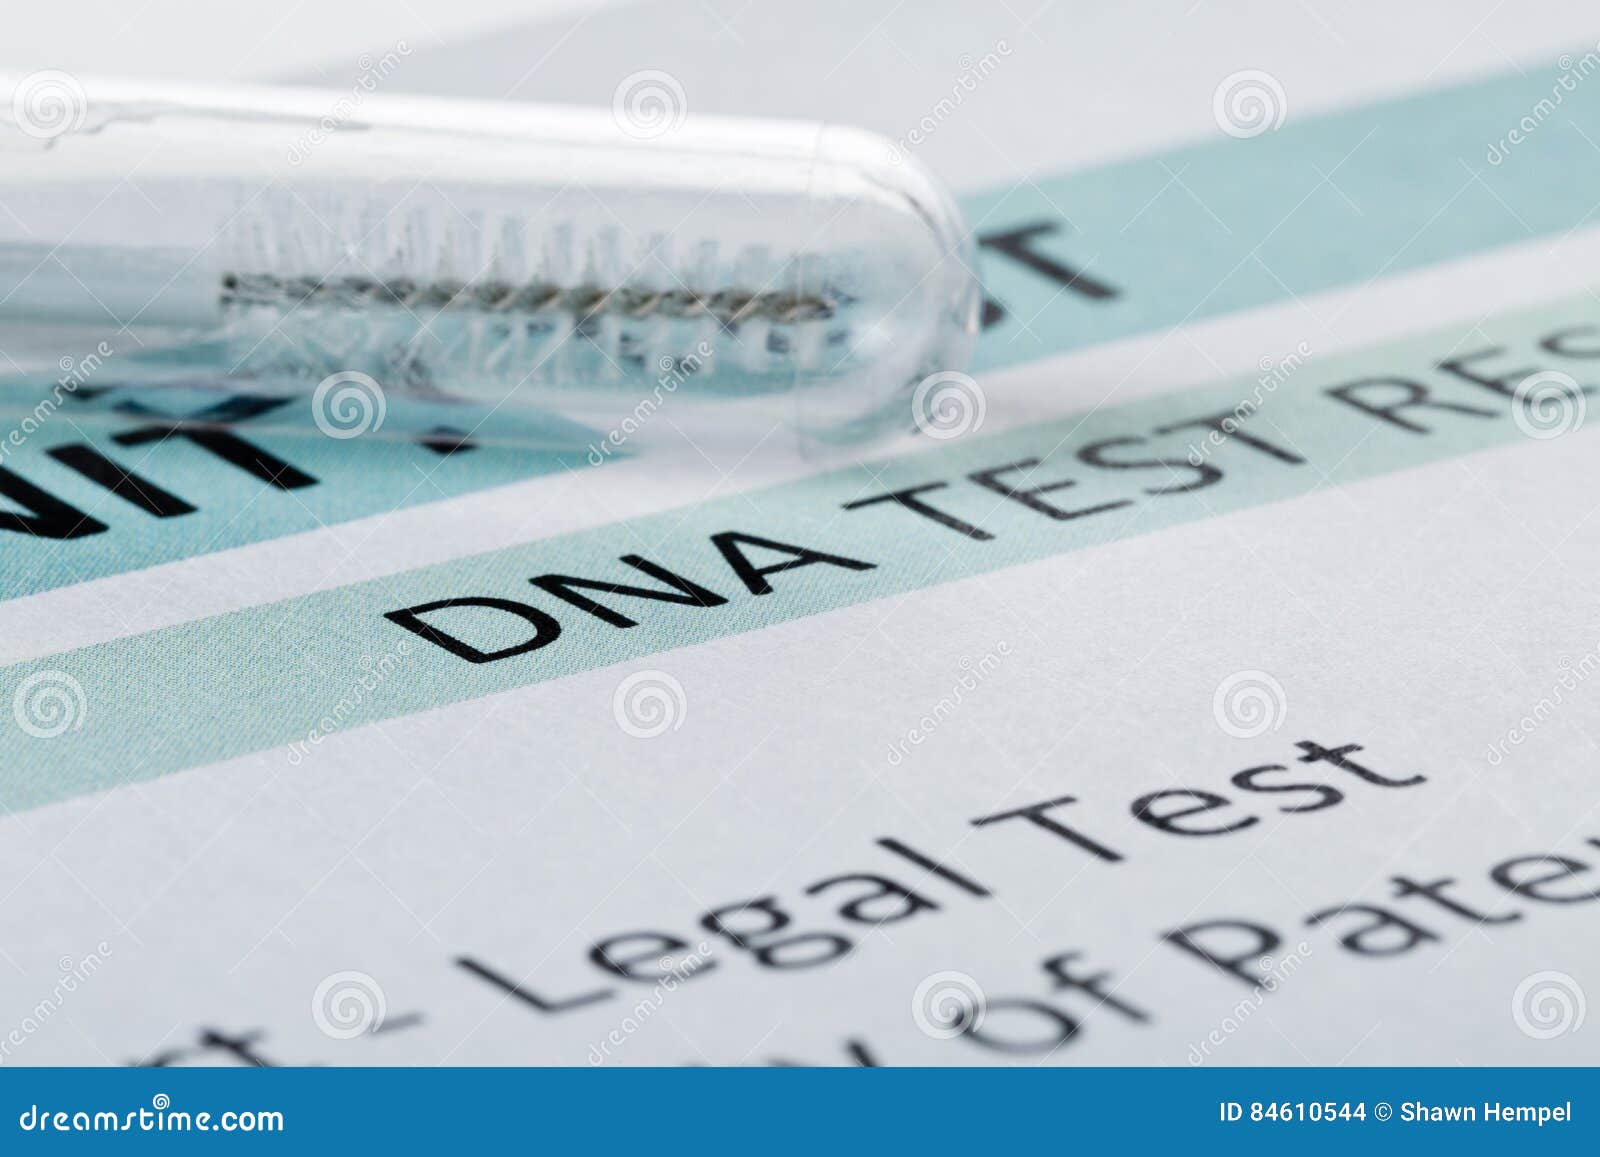 paternity test result form with buccal swab in test tube